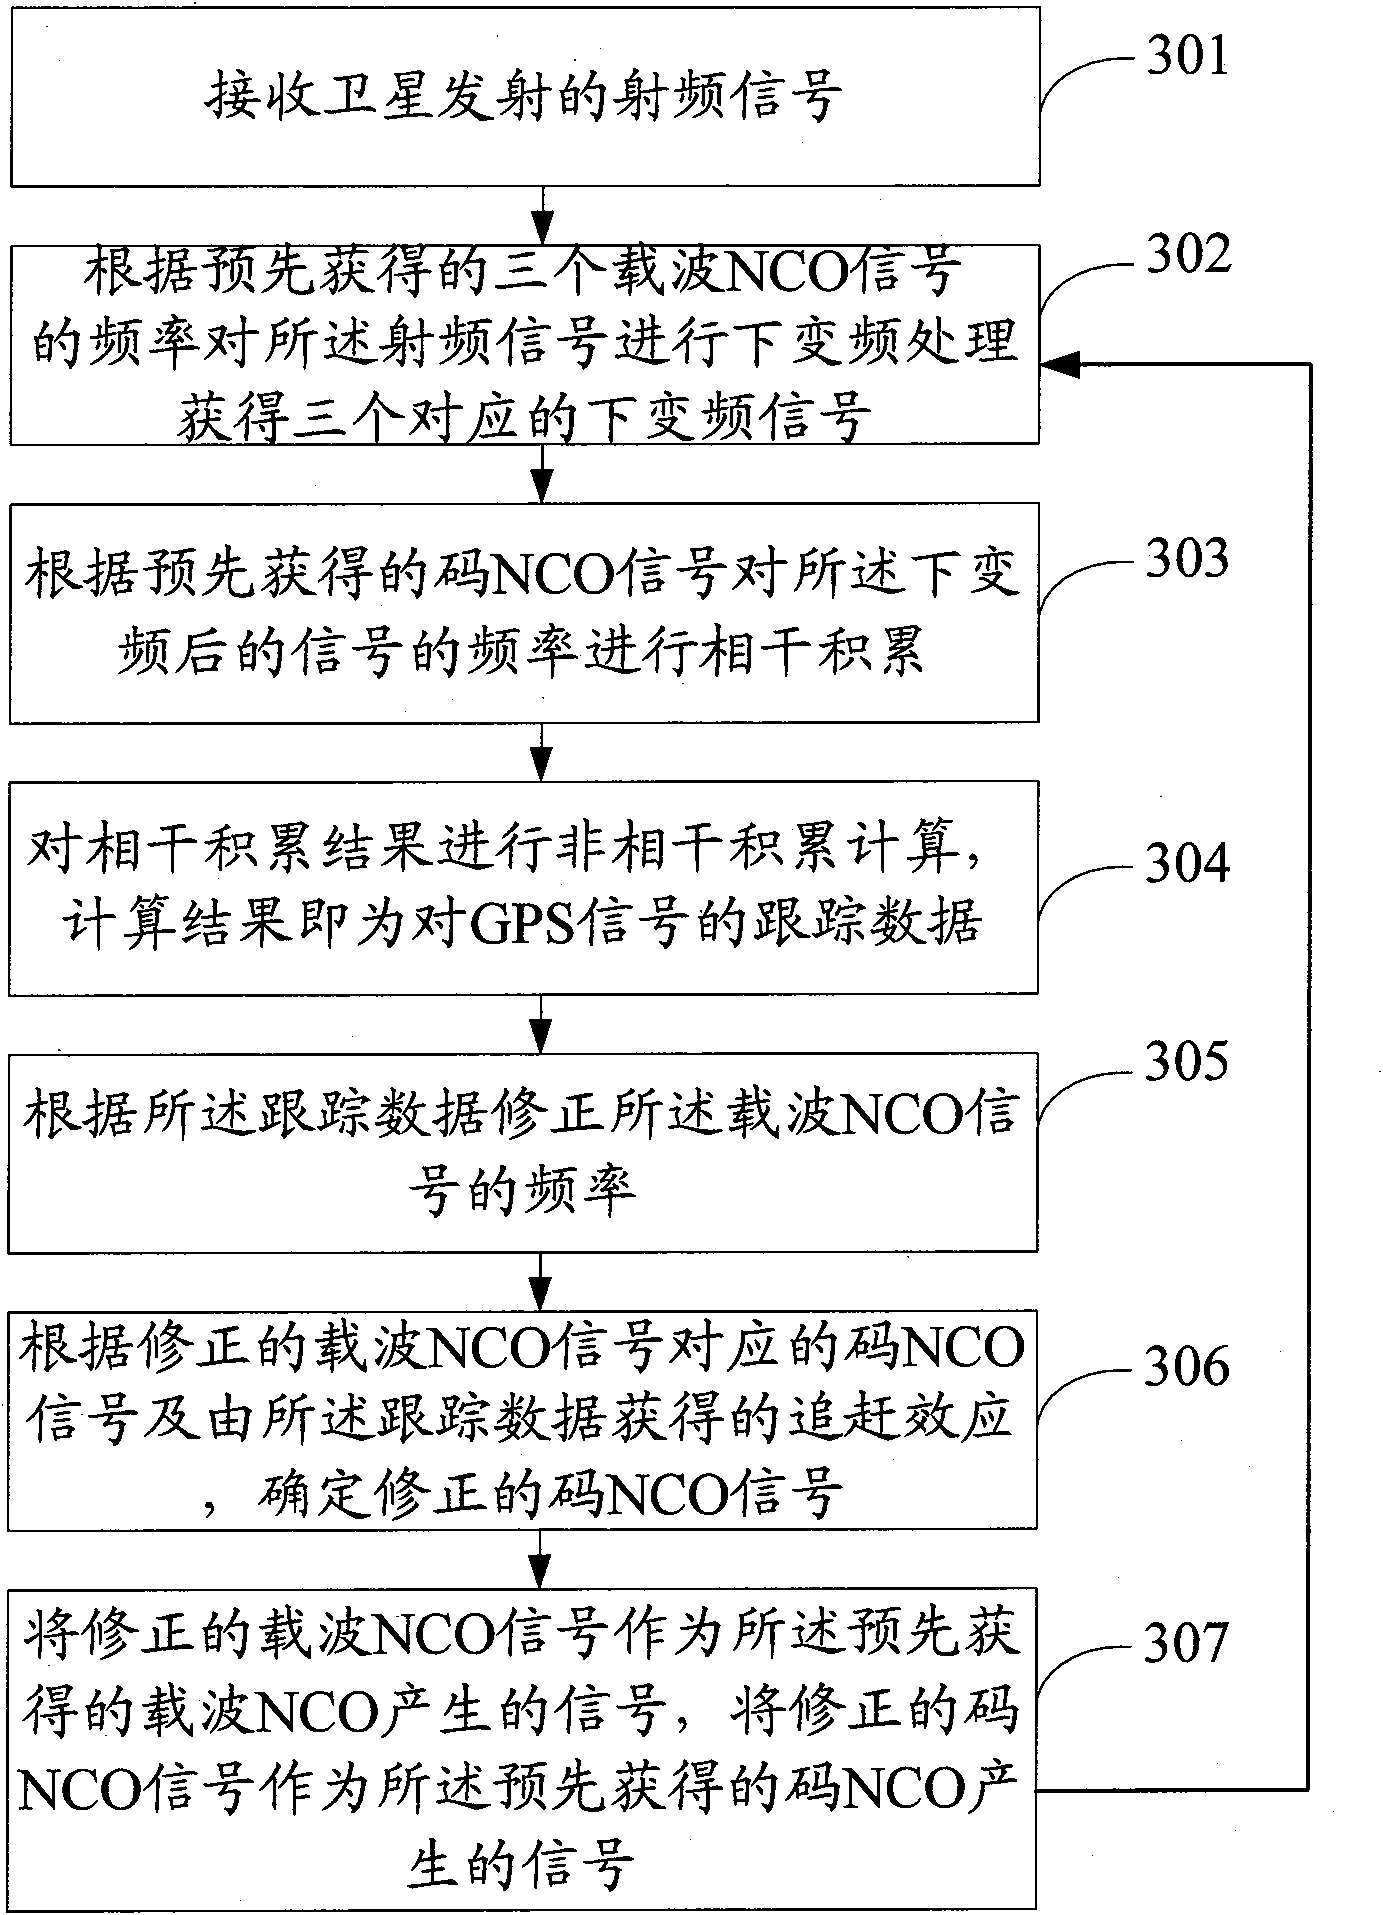 Global position system (GPS) signal tracking method, tracking channel loop and adjusting method thereof